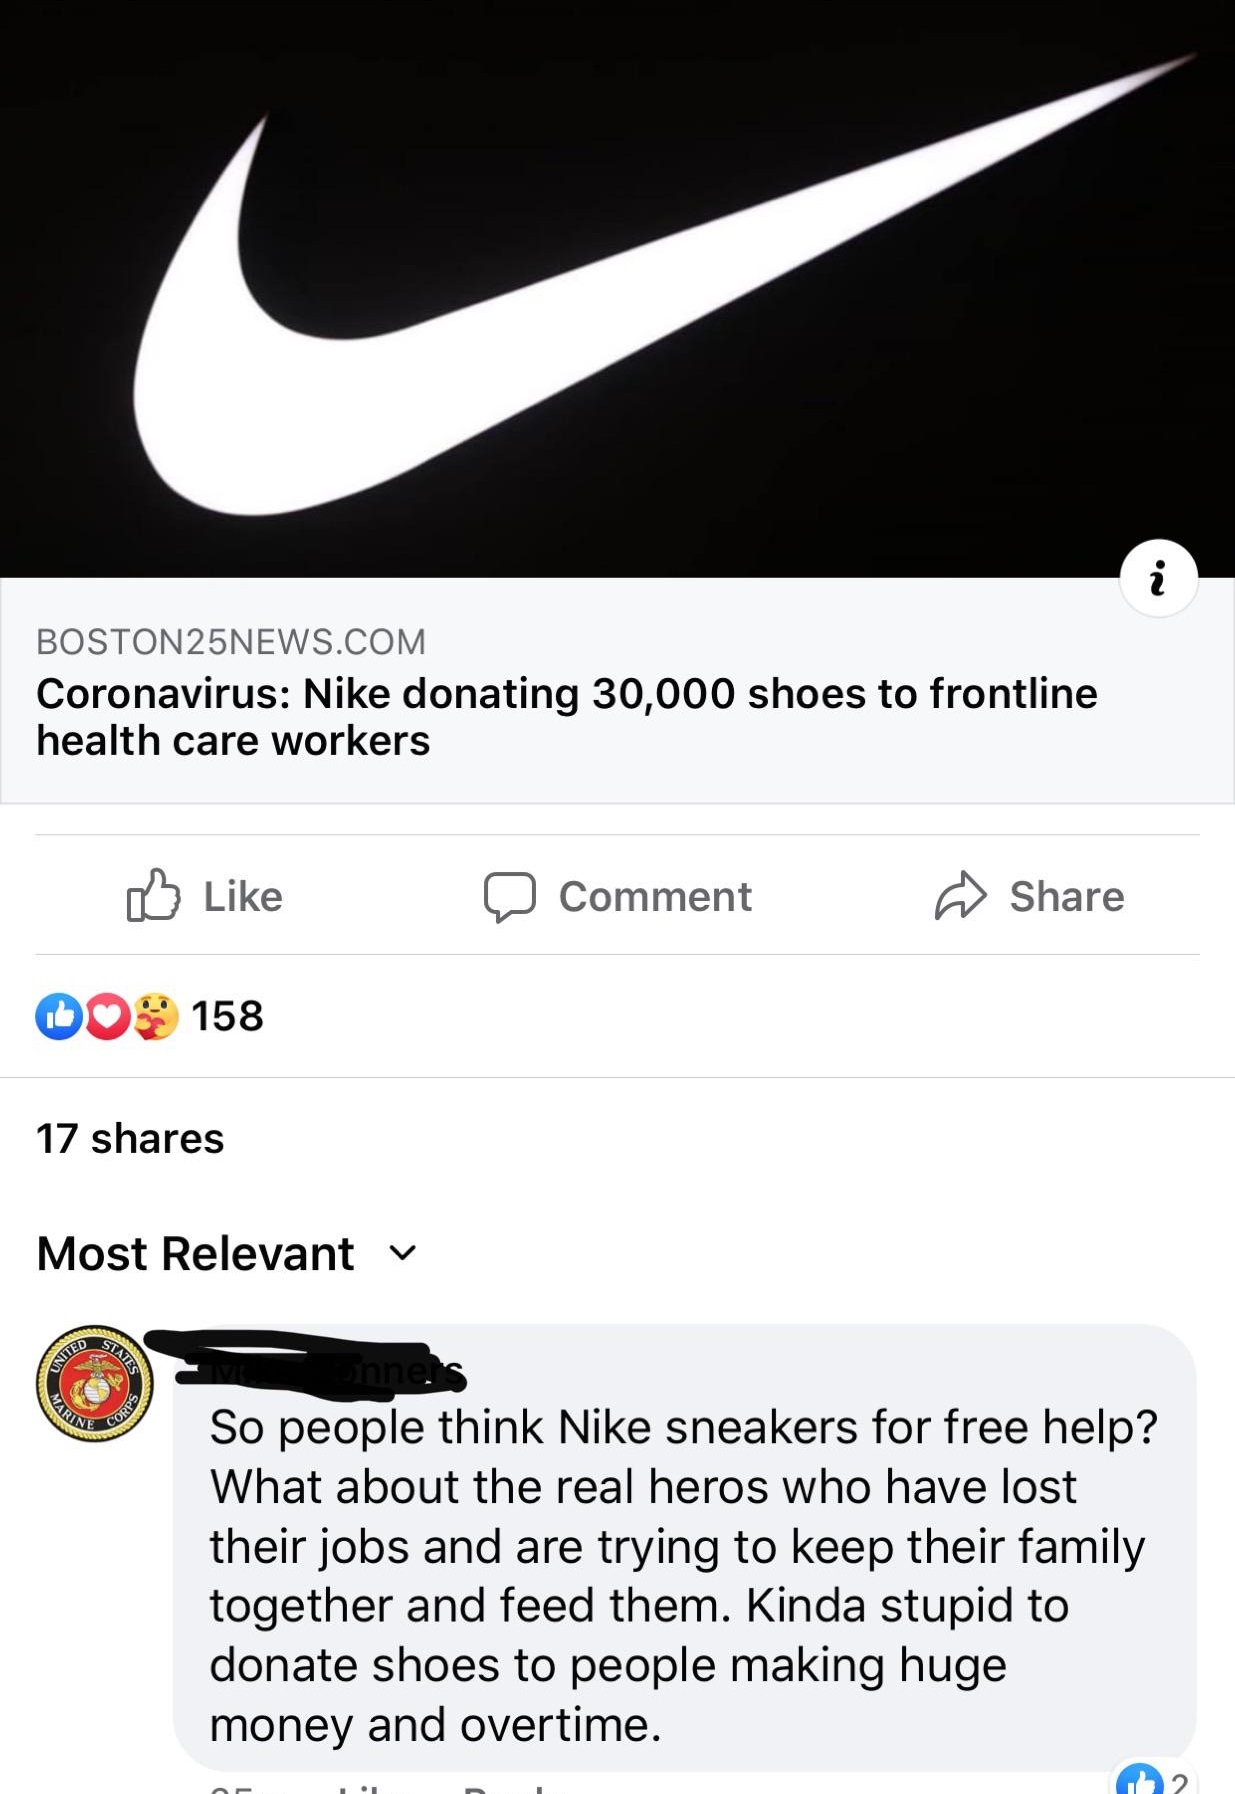 design - BOSTON25NEWS.Com Coronavirus Nike donating 30,000 shoes to frontline health care workers Comment @ Dos 158 17 Most Relevant v State Nited Krine Corps So people think Nike sneakers for free help? What about the real heros who have lost their jobs 